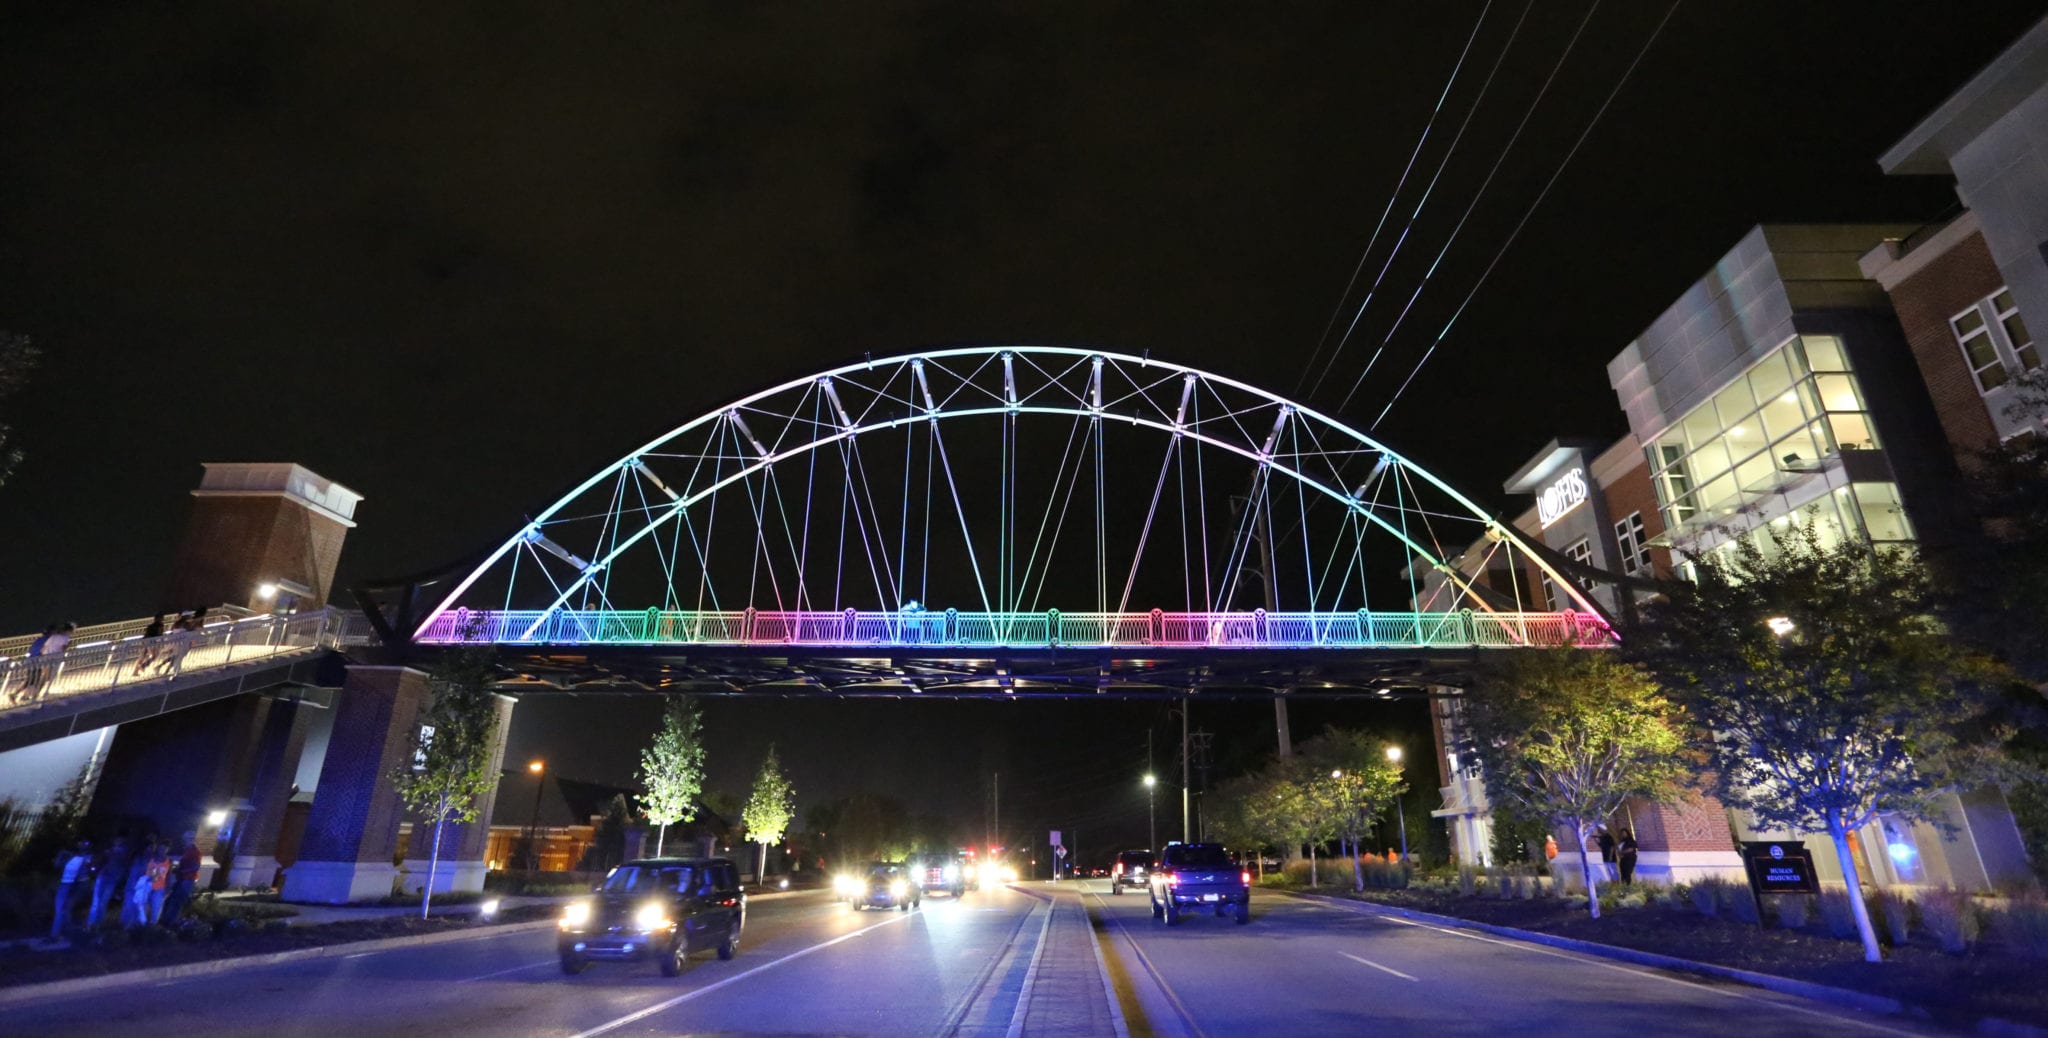 Wide view of pedestrian bridge design with LED lighting